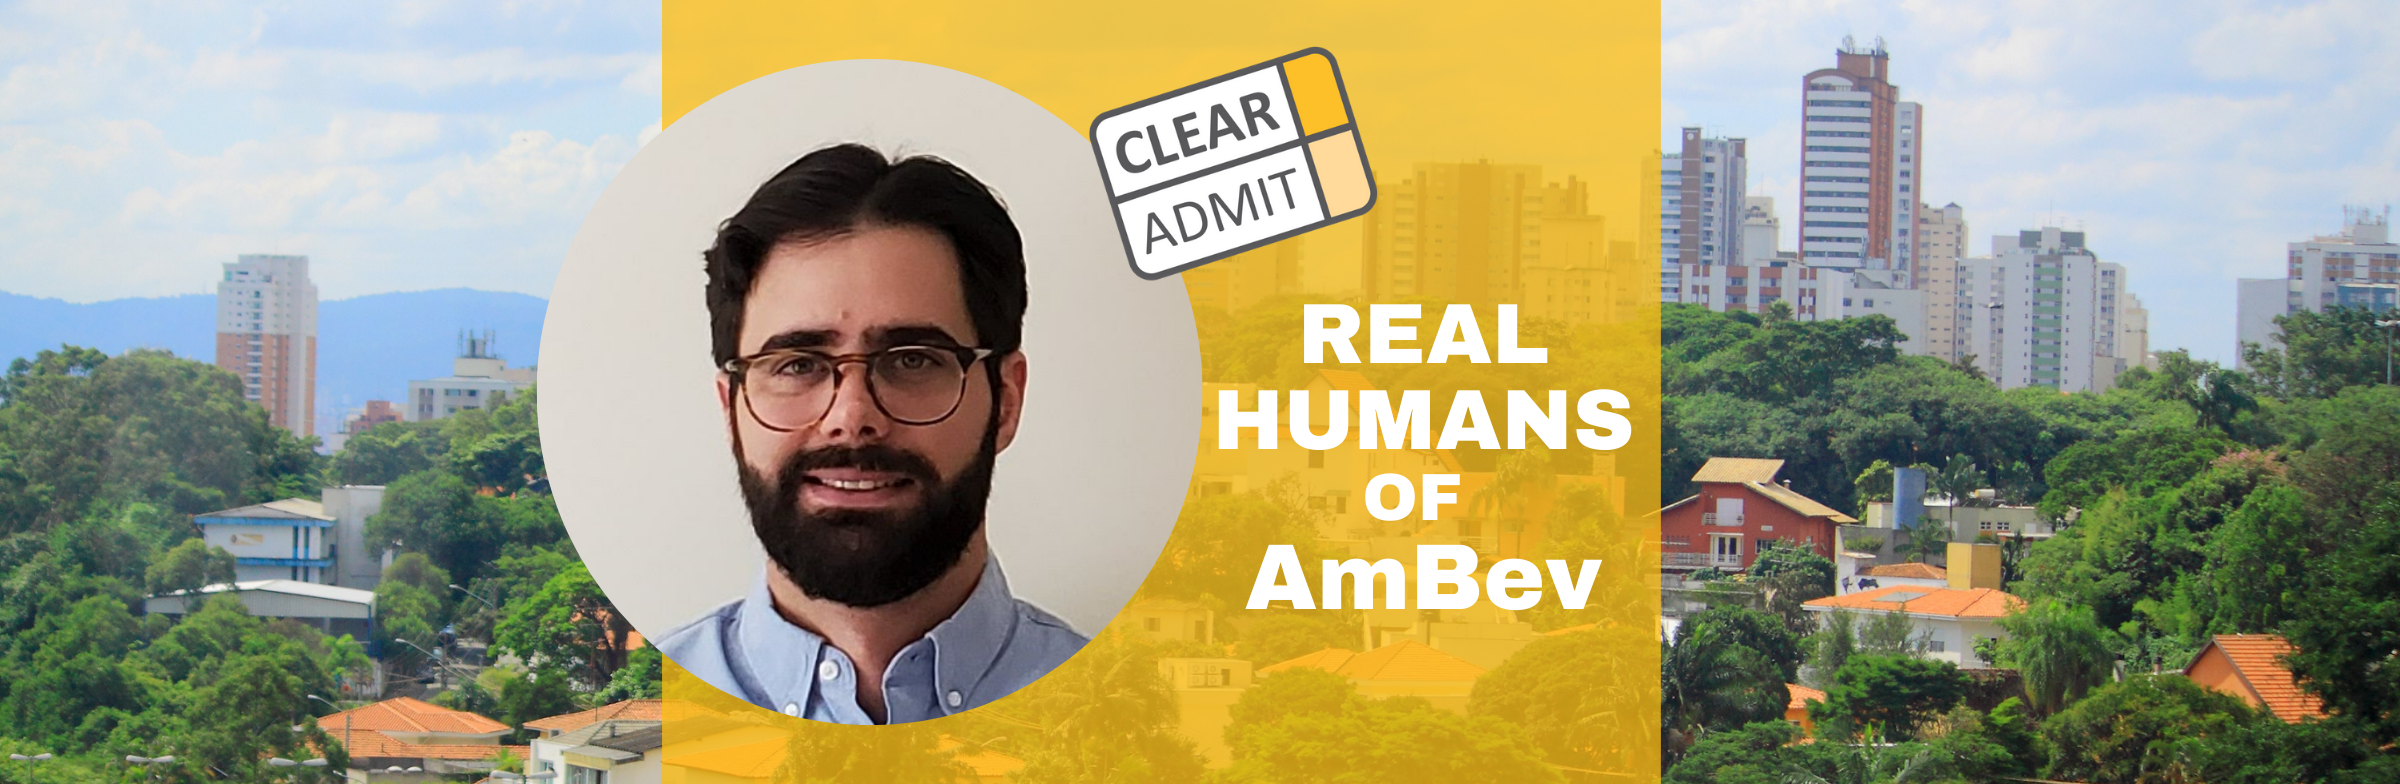 Image for Real Humans of AmBev: Marcelo Goncalez, Cornell ‘18, Plant General Manager